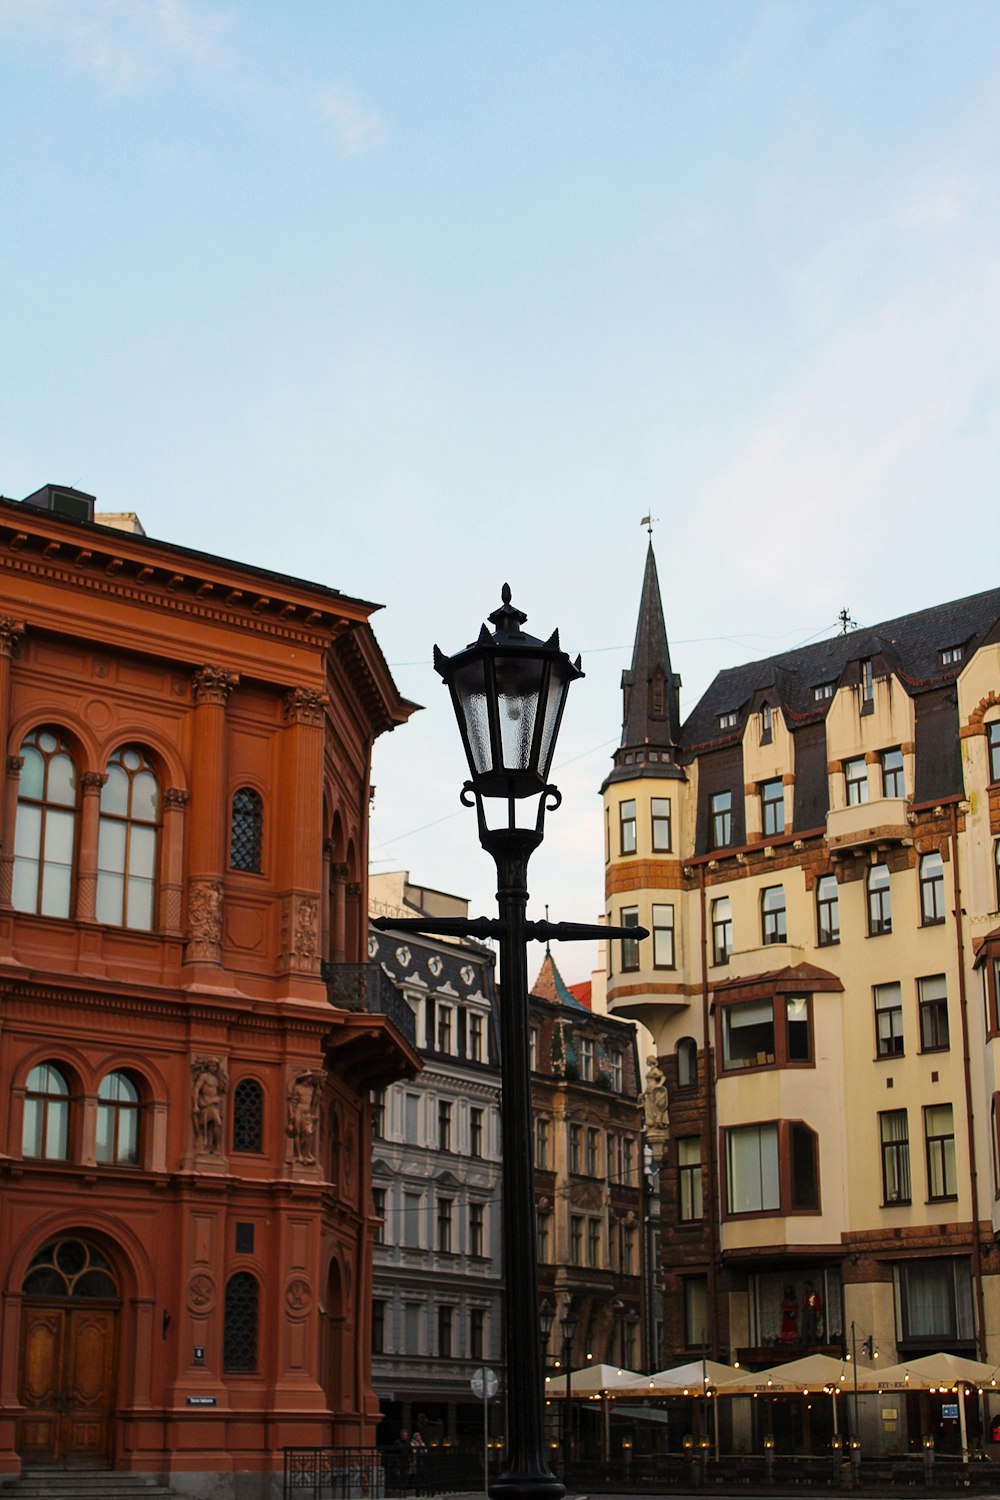 a street light in front of a row of buildings